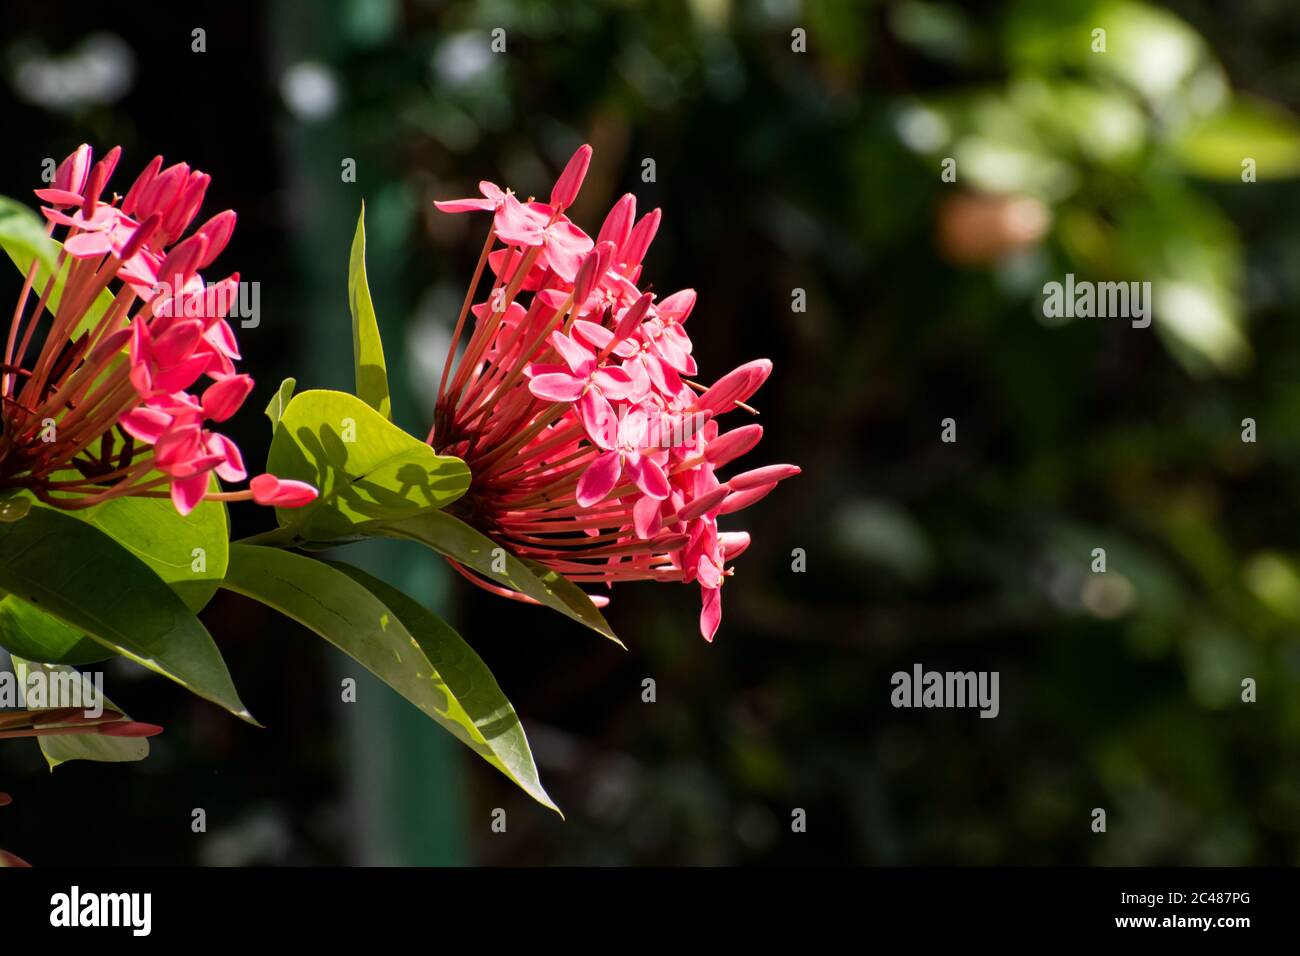 A cluster of red ixora coccinea or jungle geranium flowers on a bright summer day with green leaves and a blurred nature background of greenery. Stock Photo